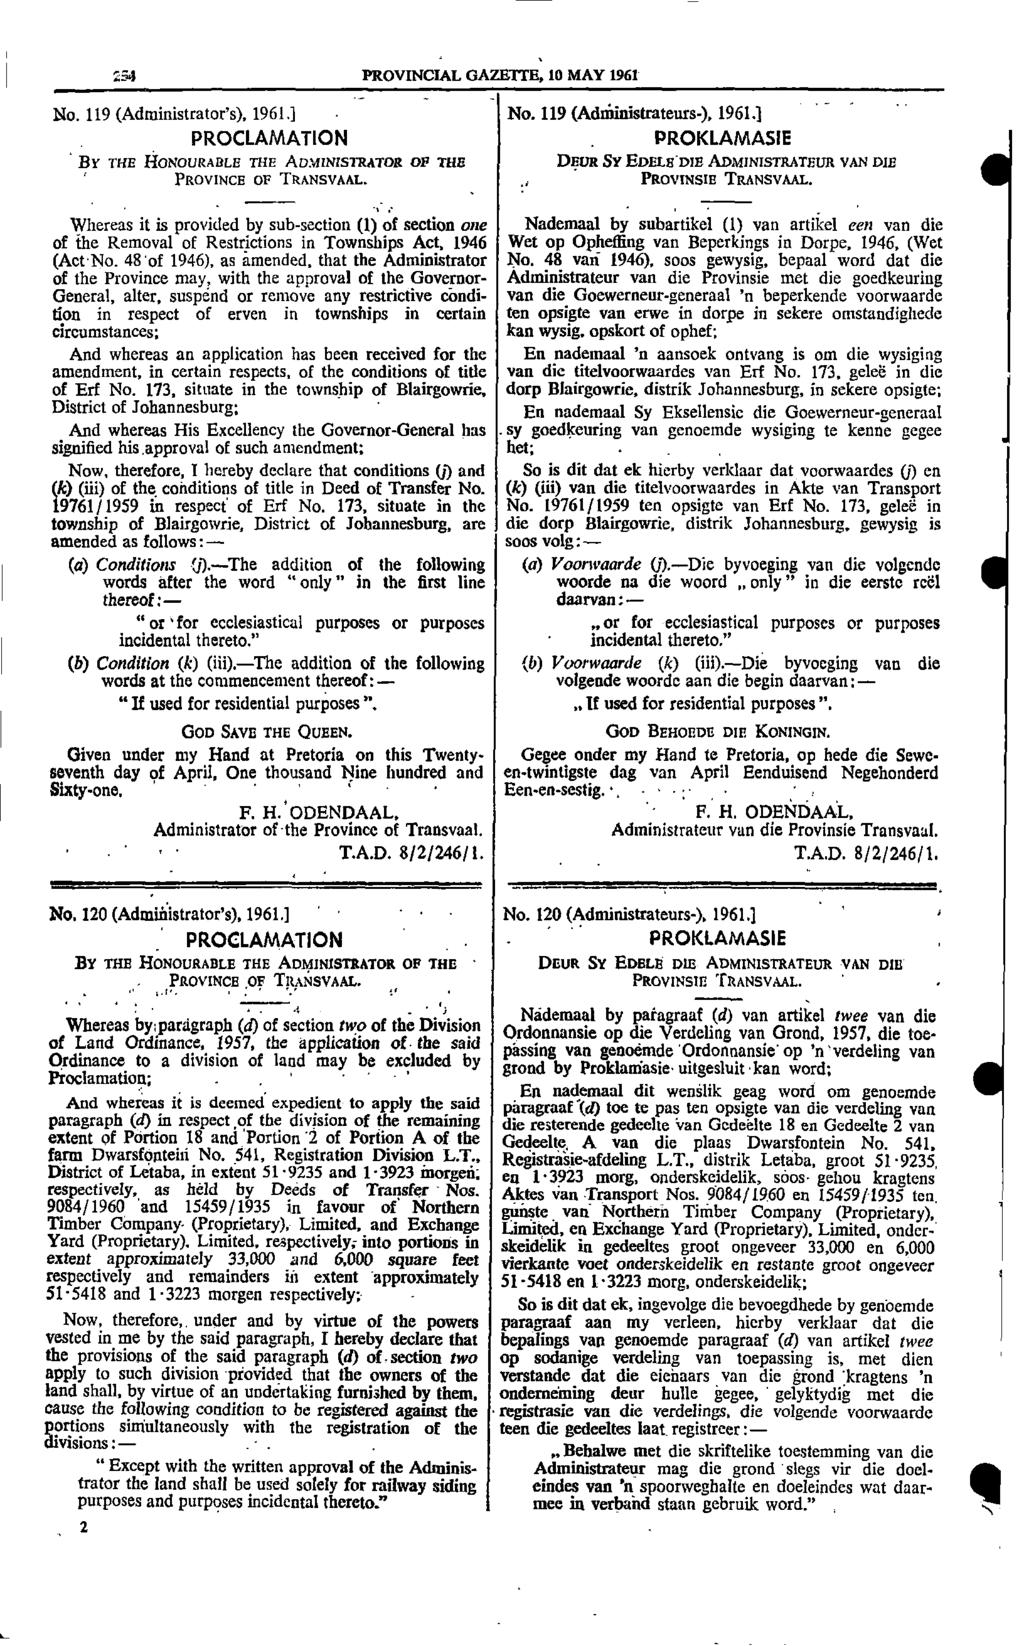 1 :54 PROVINCIAL GAZETTE 10 MAY 1961 No 119 (Administrators) 1961] No 119 (Adnfinistrateurs) 1961] PROCLAMATION PROKLAMASIE BY THE HONOURABLE THE ADMINISTRATOR OP THE DWR SY EDELEDIE ADMINISTRATEUR